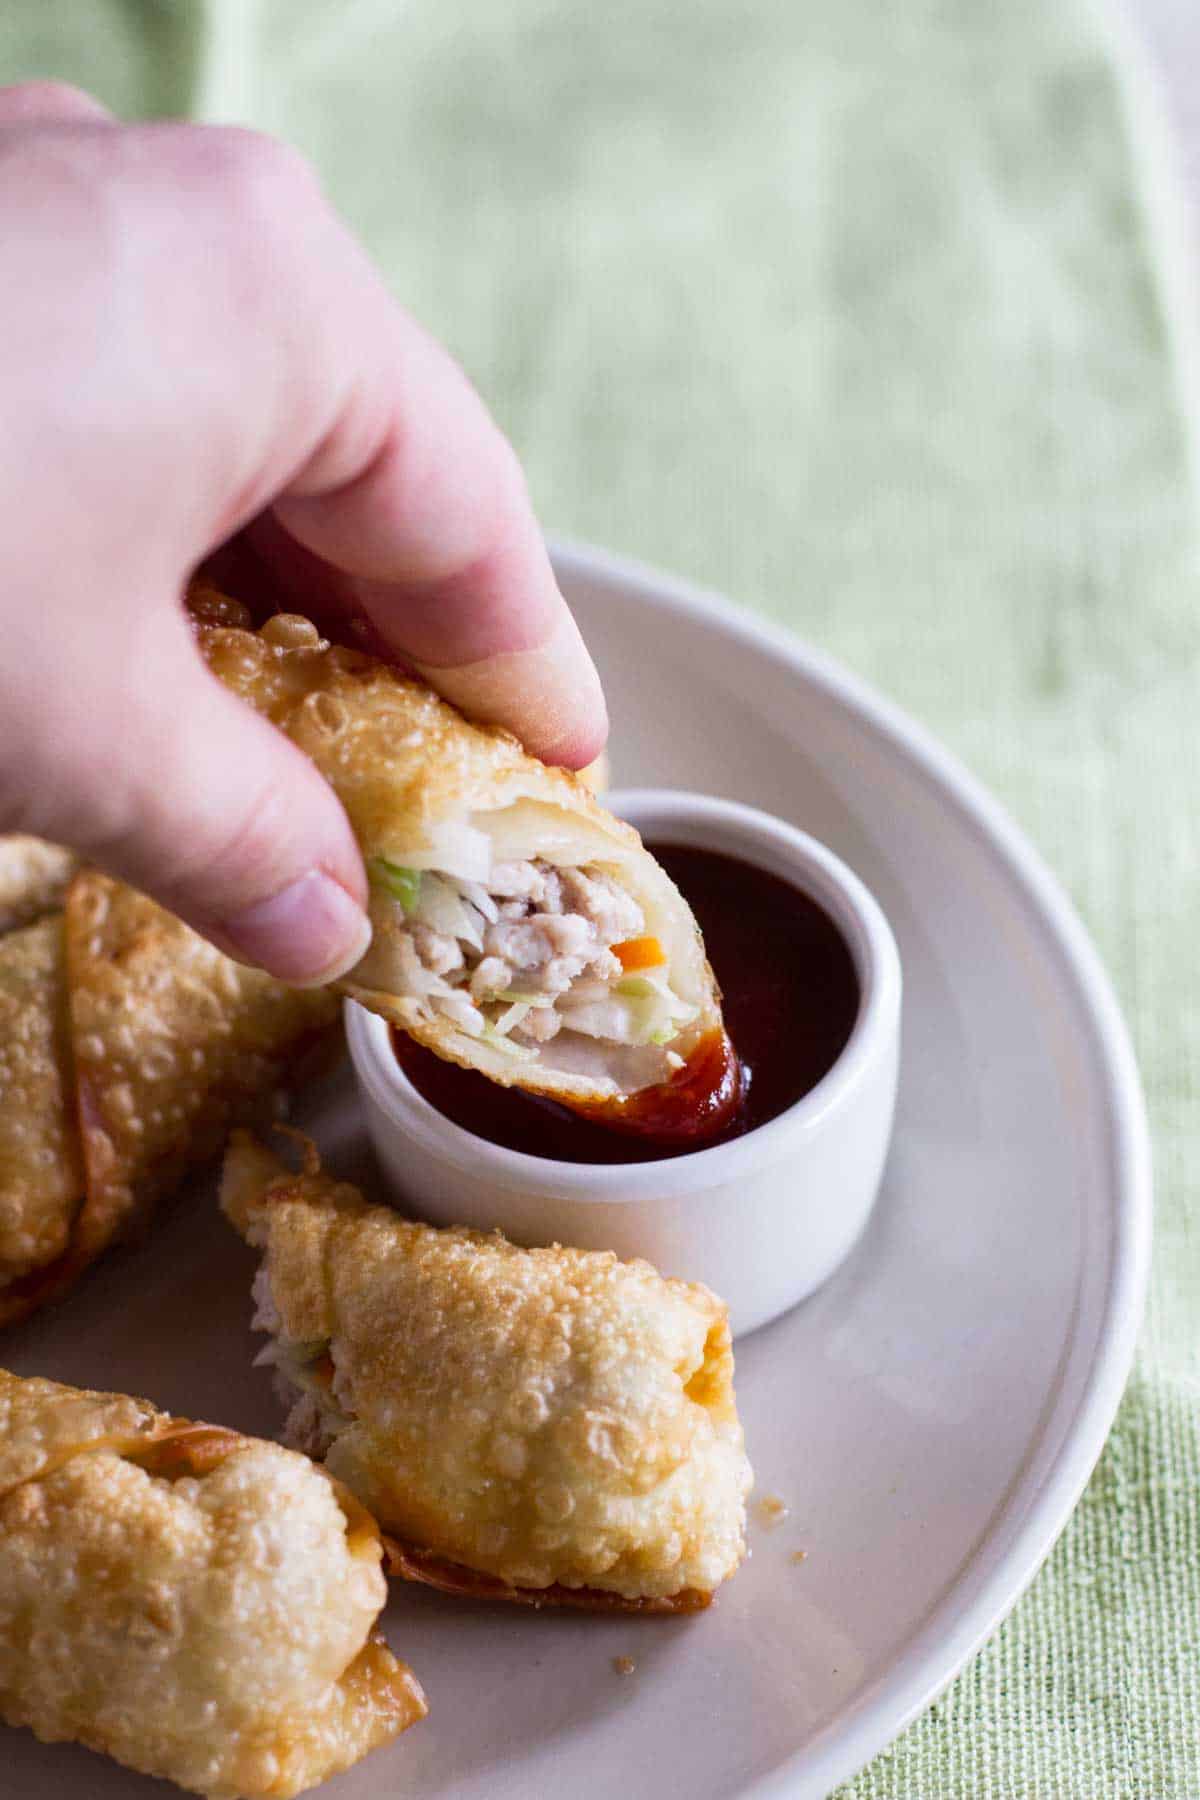 Dipping an egg roll into sweet and sour sauce.